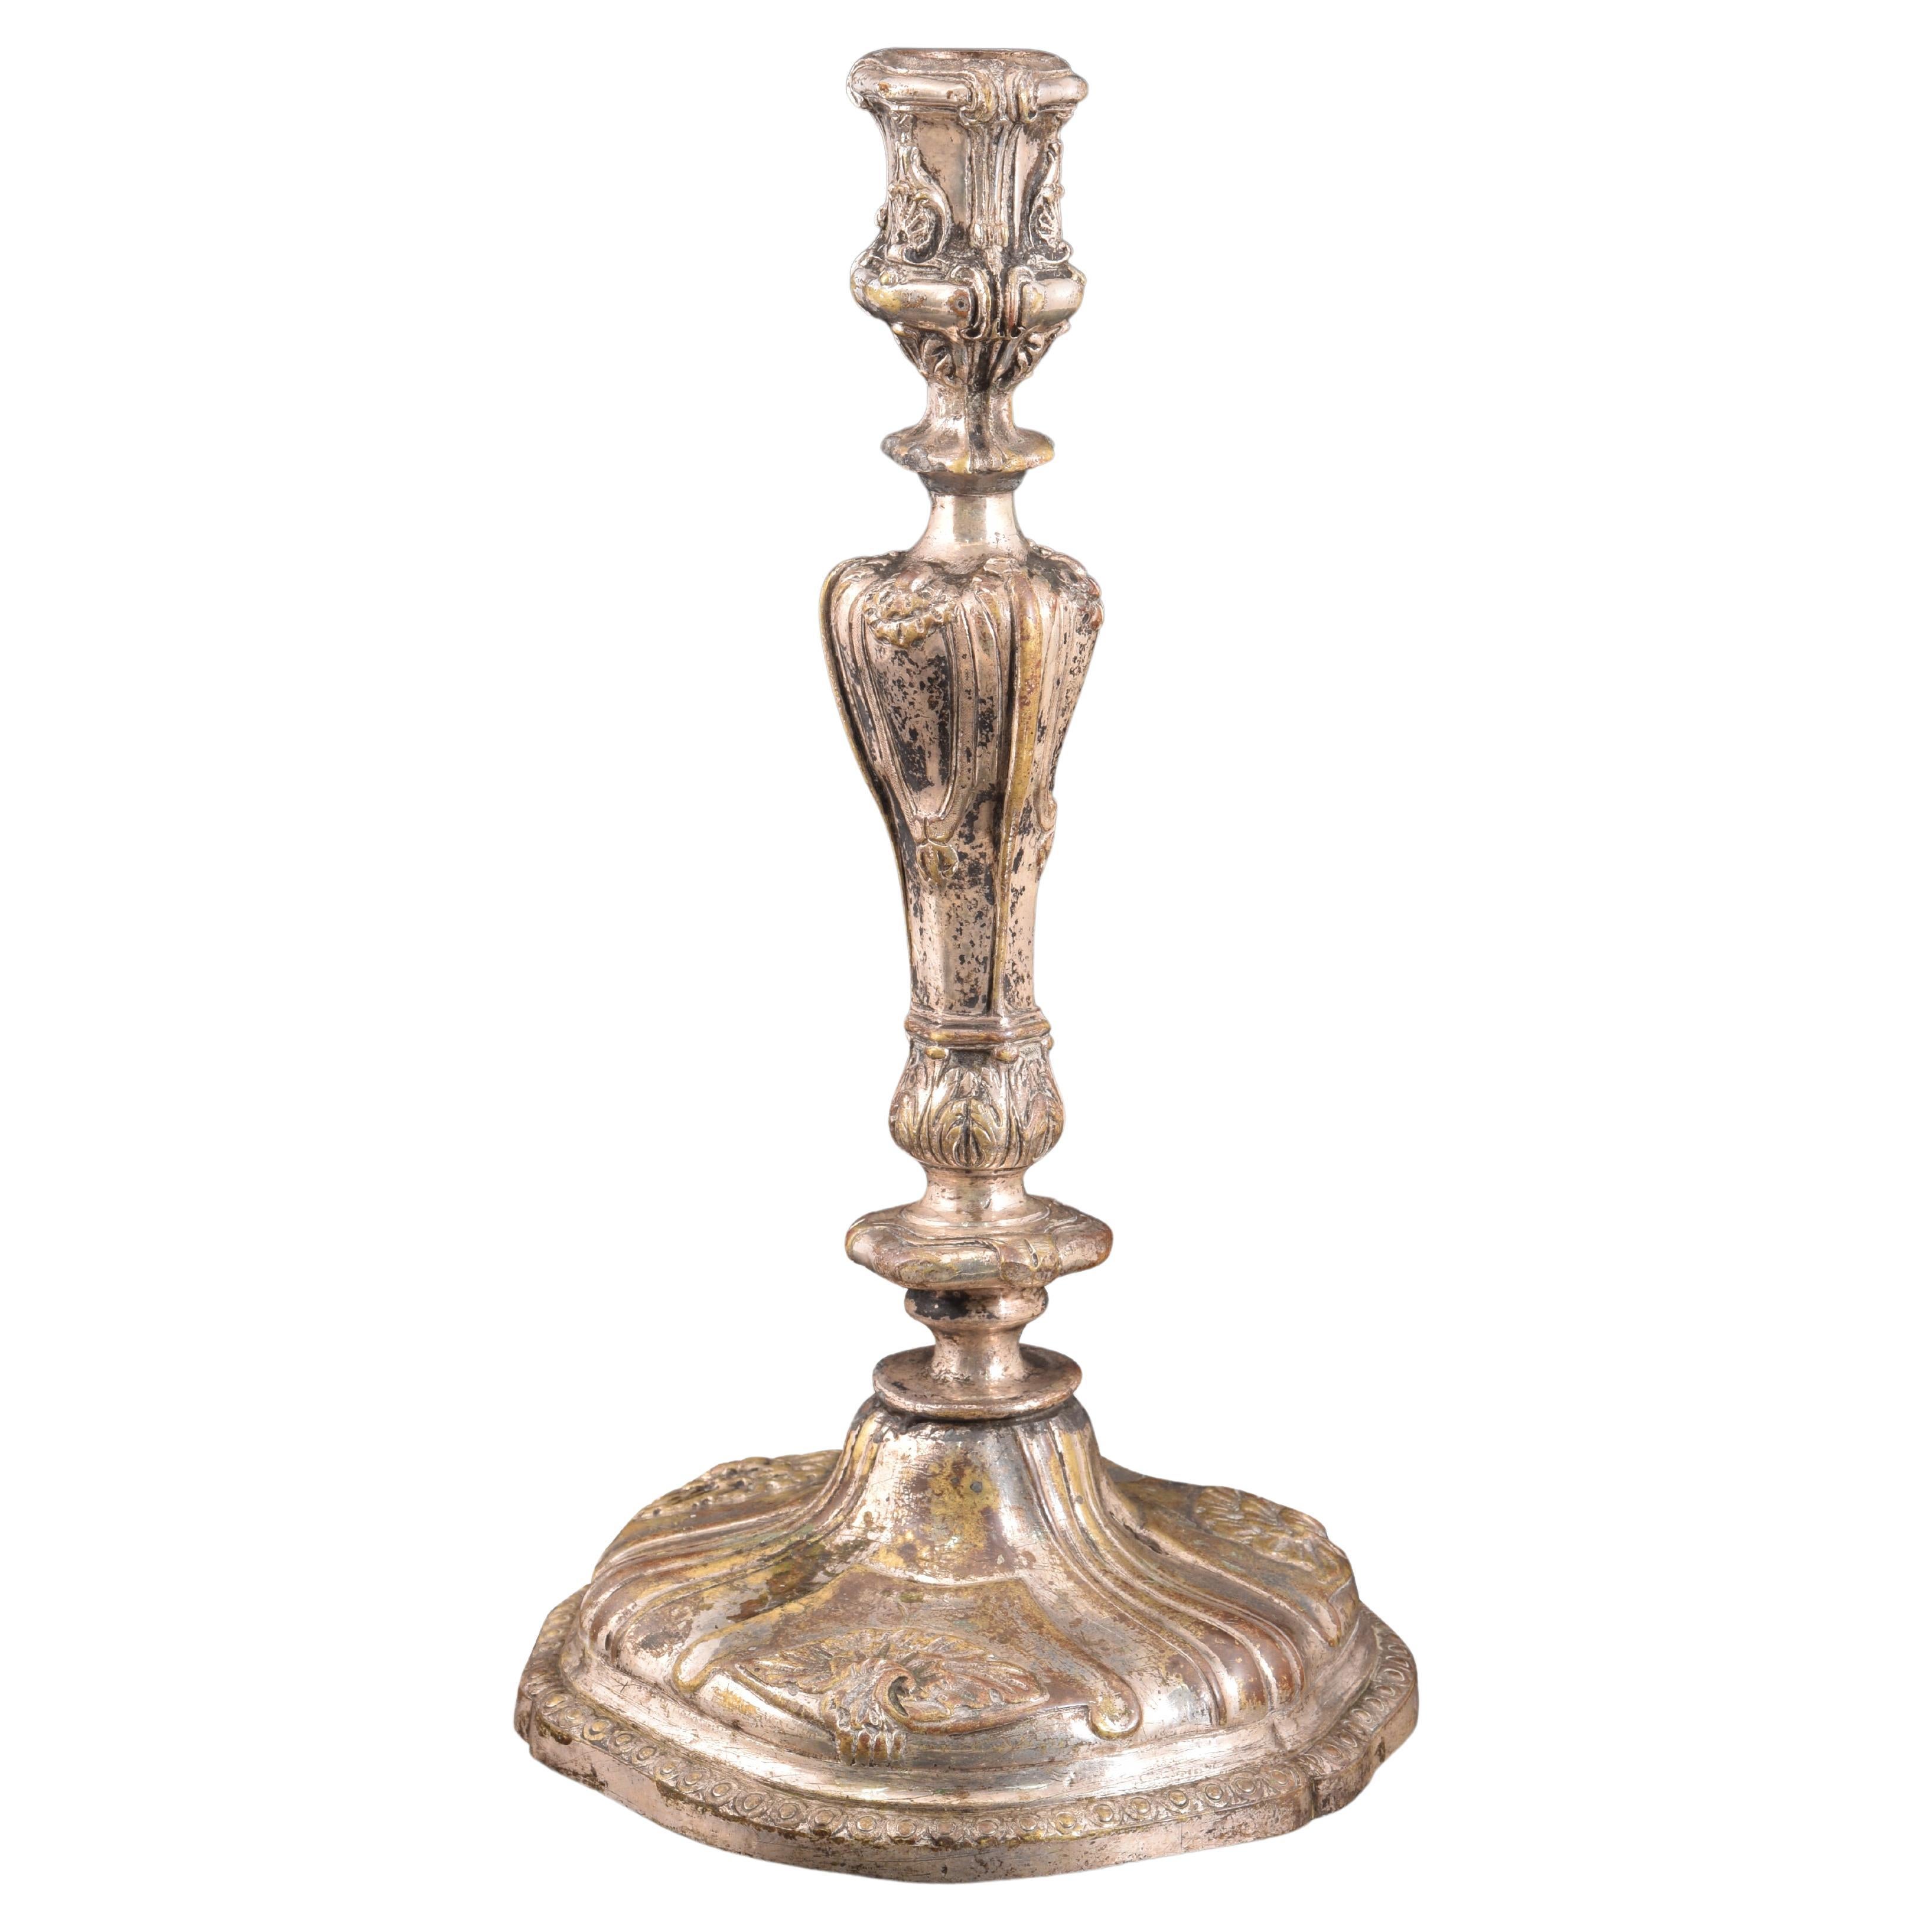 Candlestick or candle holder. Bronze. 19th century. For Sale